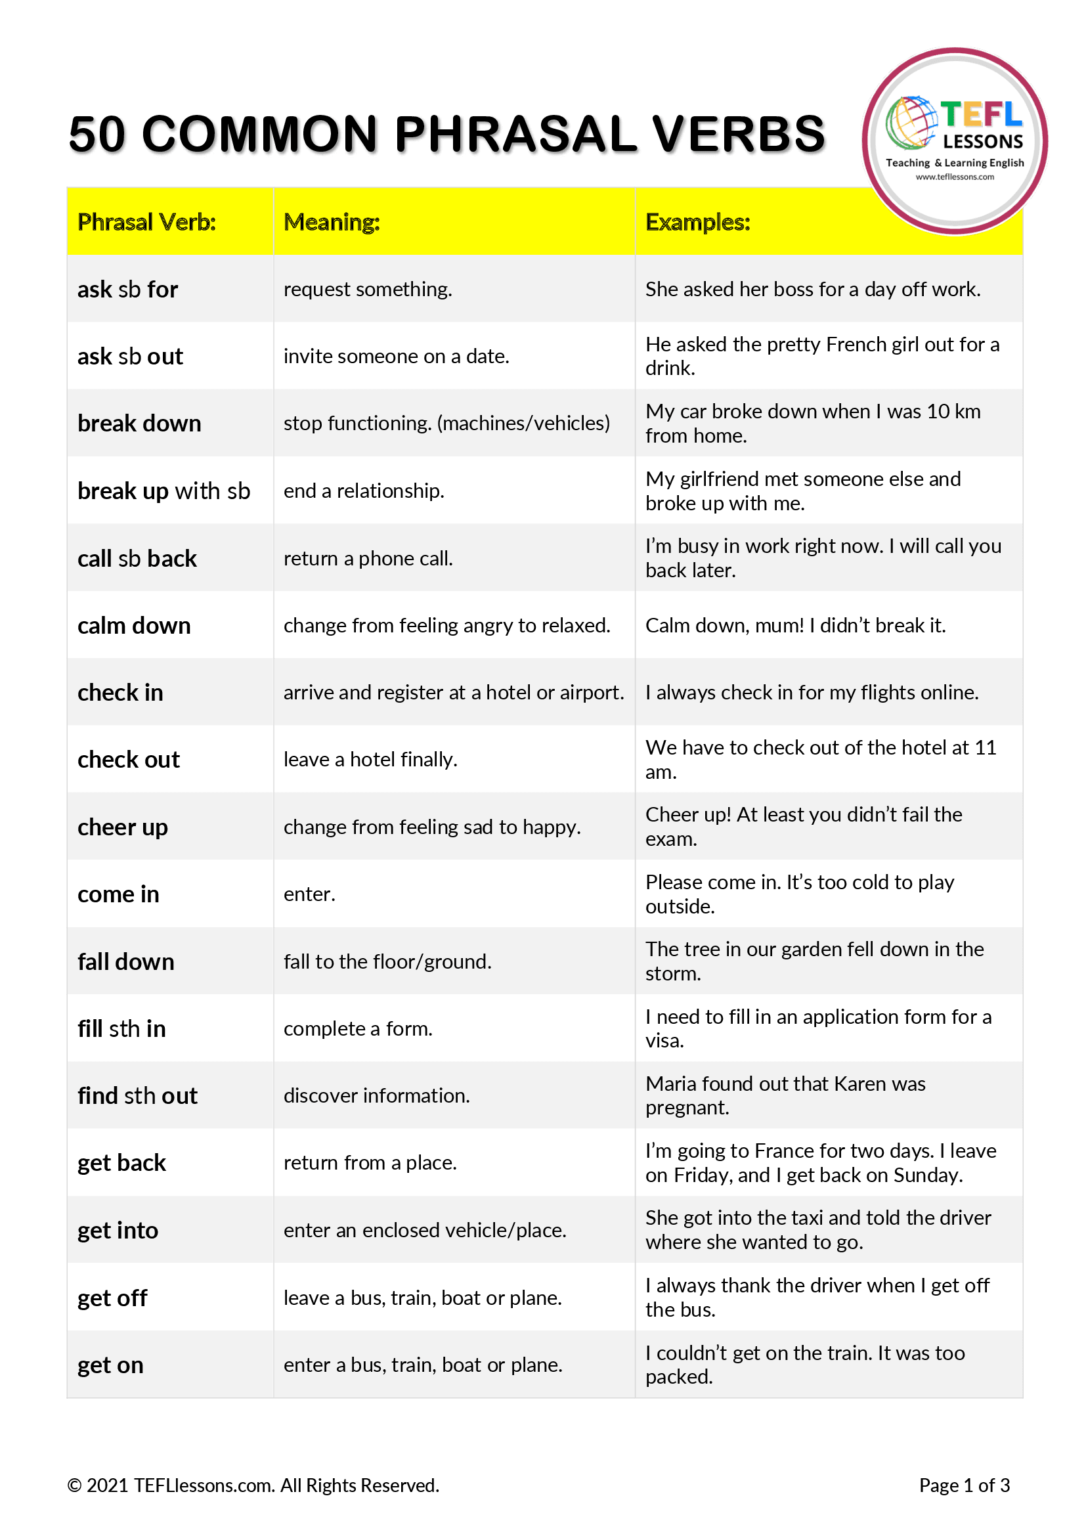 100-most-common-phrasal-verbs-list-lessons-for-english-english